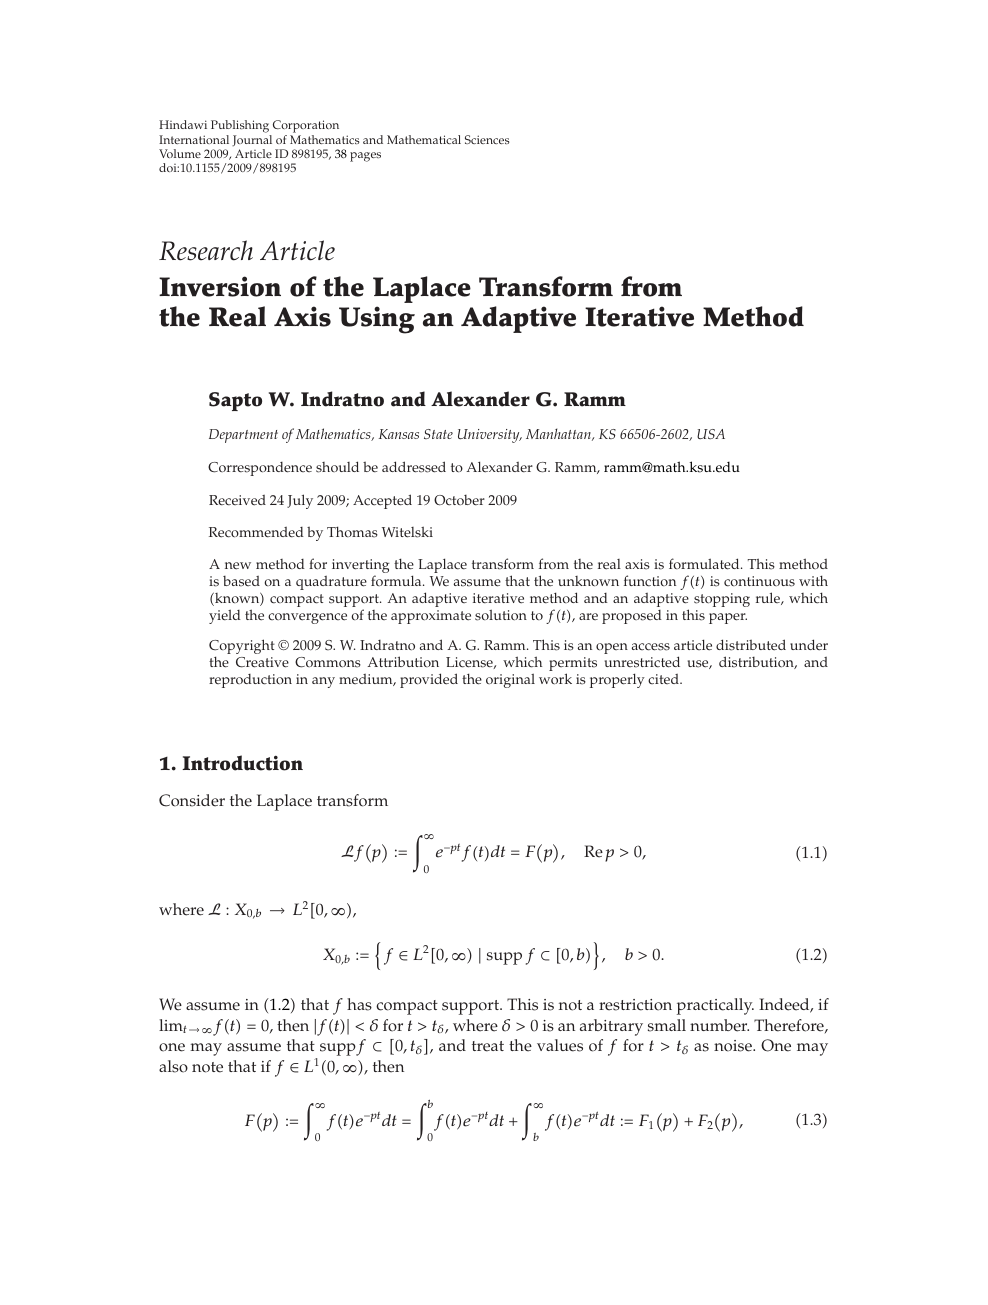 Inversion Of The Laplace Transform From The Real Axis Using An Adaptive Iterative Method Topic Of Research Paper In Mathematics Download Scholarly Article Pdf And Read For Free On Cyberleninka Open